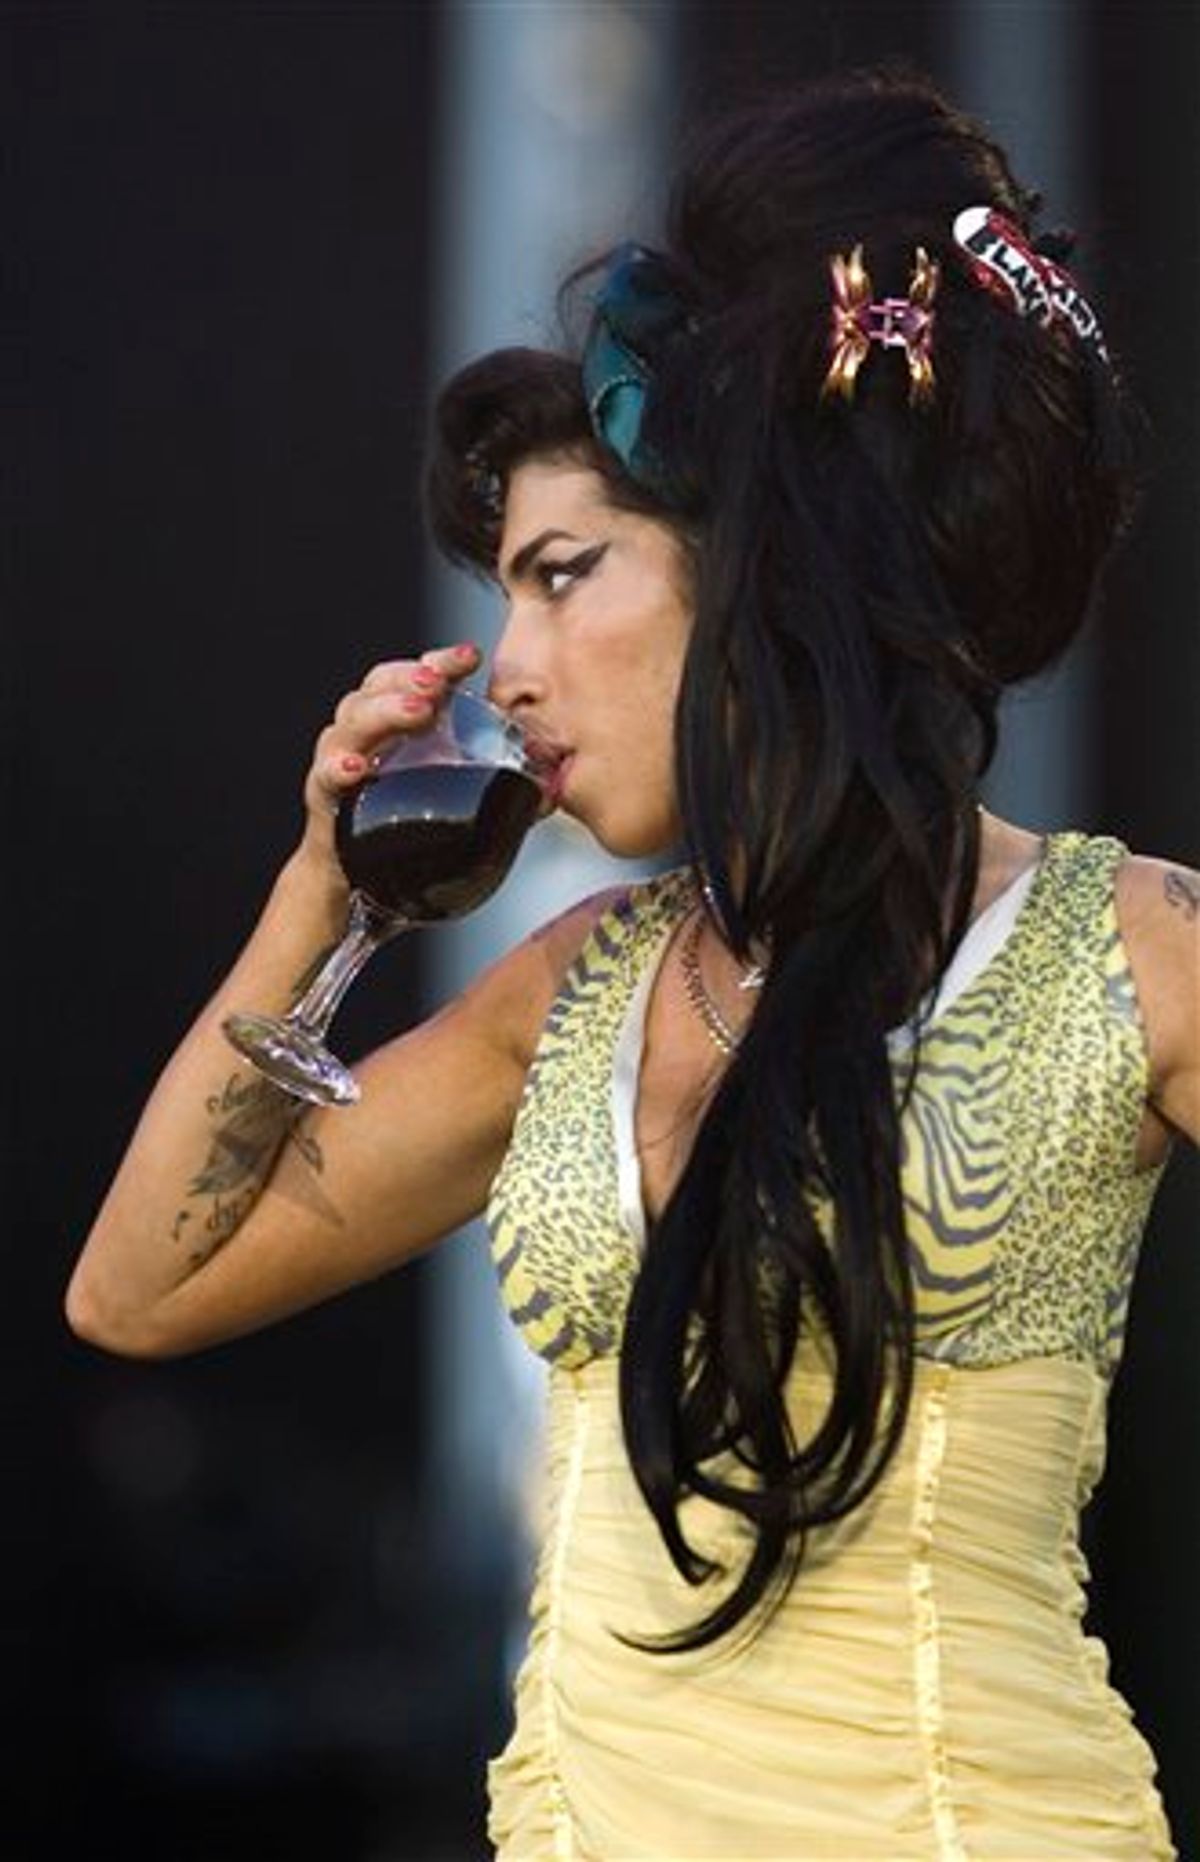 FILE - In this July 4, 2008 file photo, jazz soul singer Amy Winehouse, from England, performs during the Rock in Rio music festival in Arganda del Rey, on the outskirts of Madrid. Amy Winehouse was booed and jeered late Saturday, June 18, 2011 during a concert in Serbia's capital as she stumbled onto the stage, mumbled through her songs and wandered off. (AP Photo/Victor R. Caivano, File) EDITORIAL USE ONLY (AP)